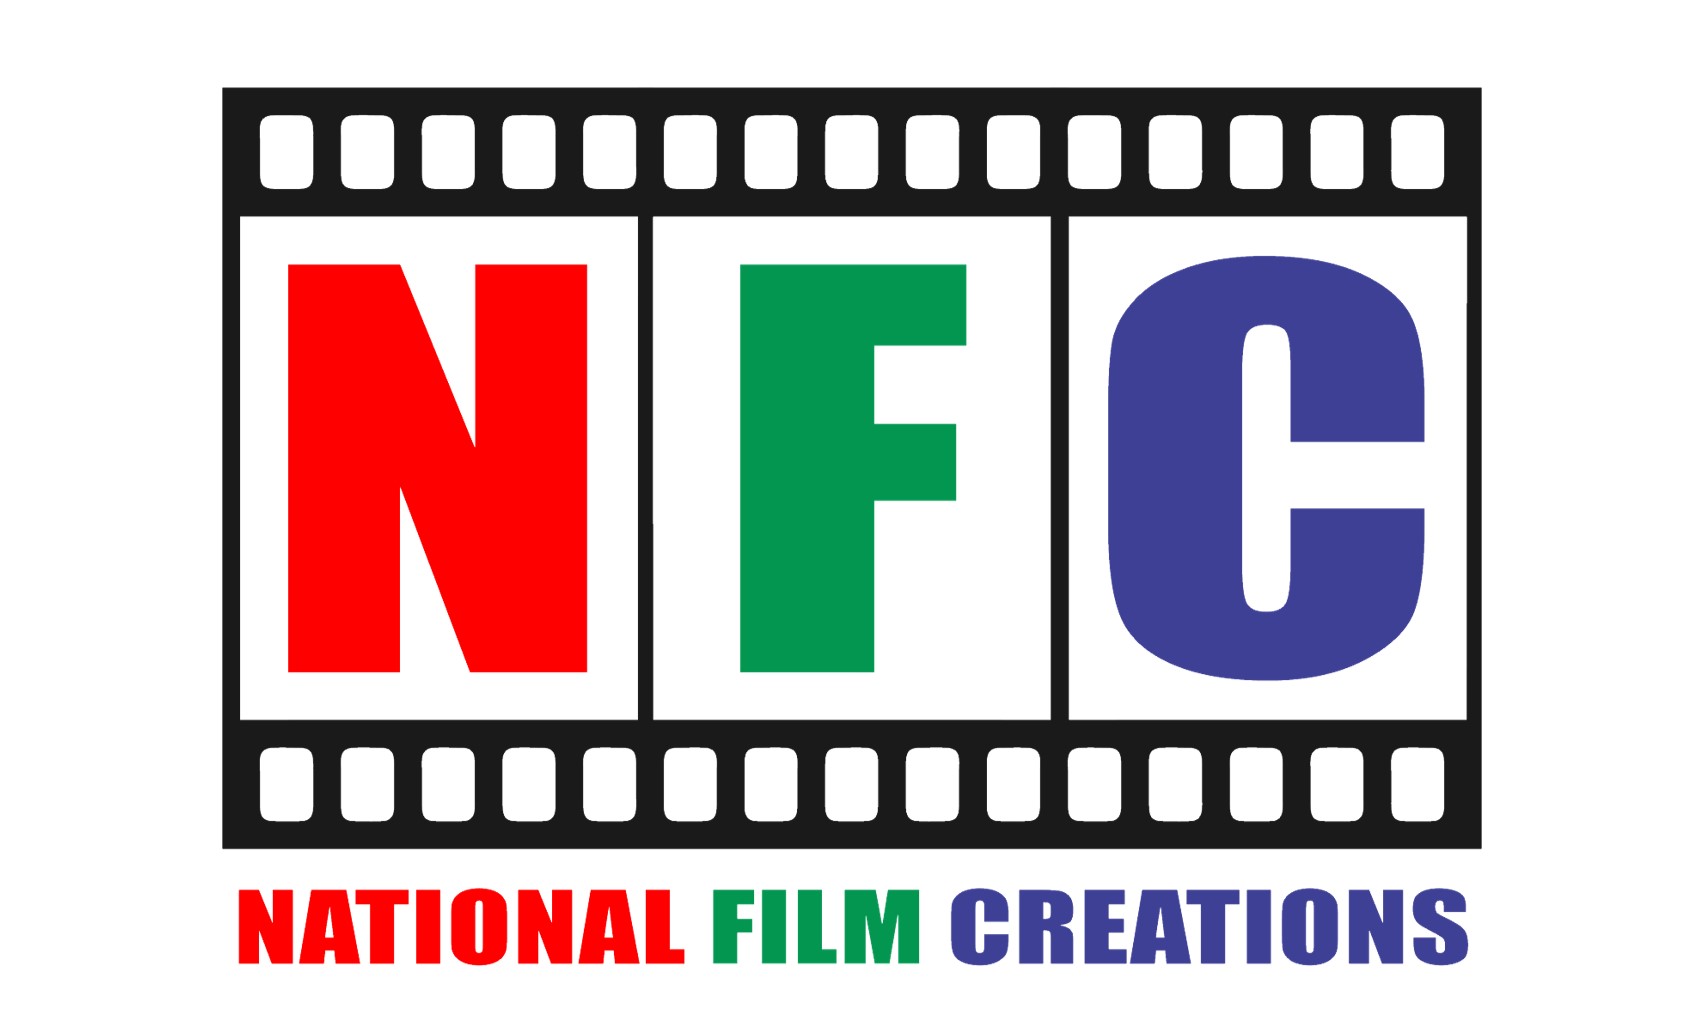 National Film Creations